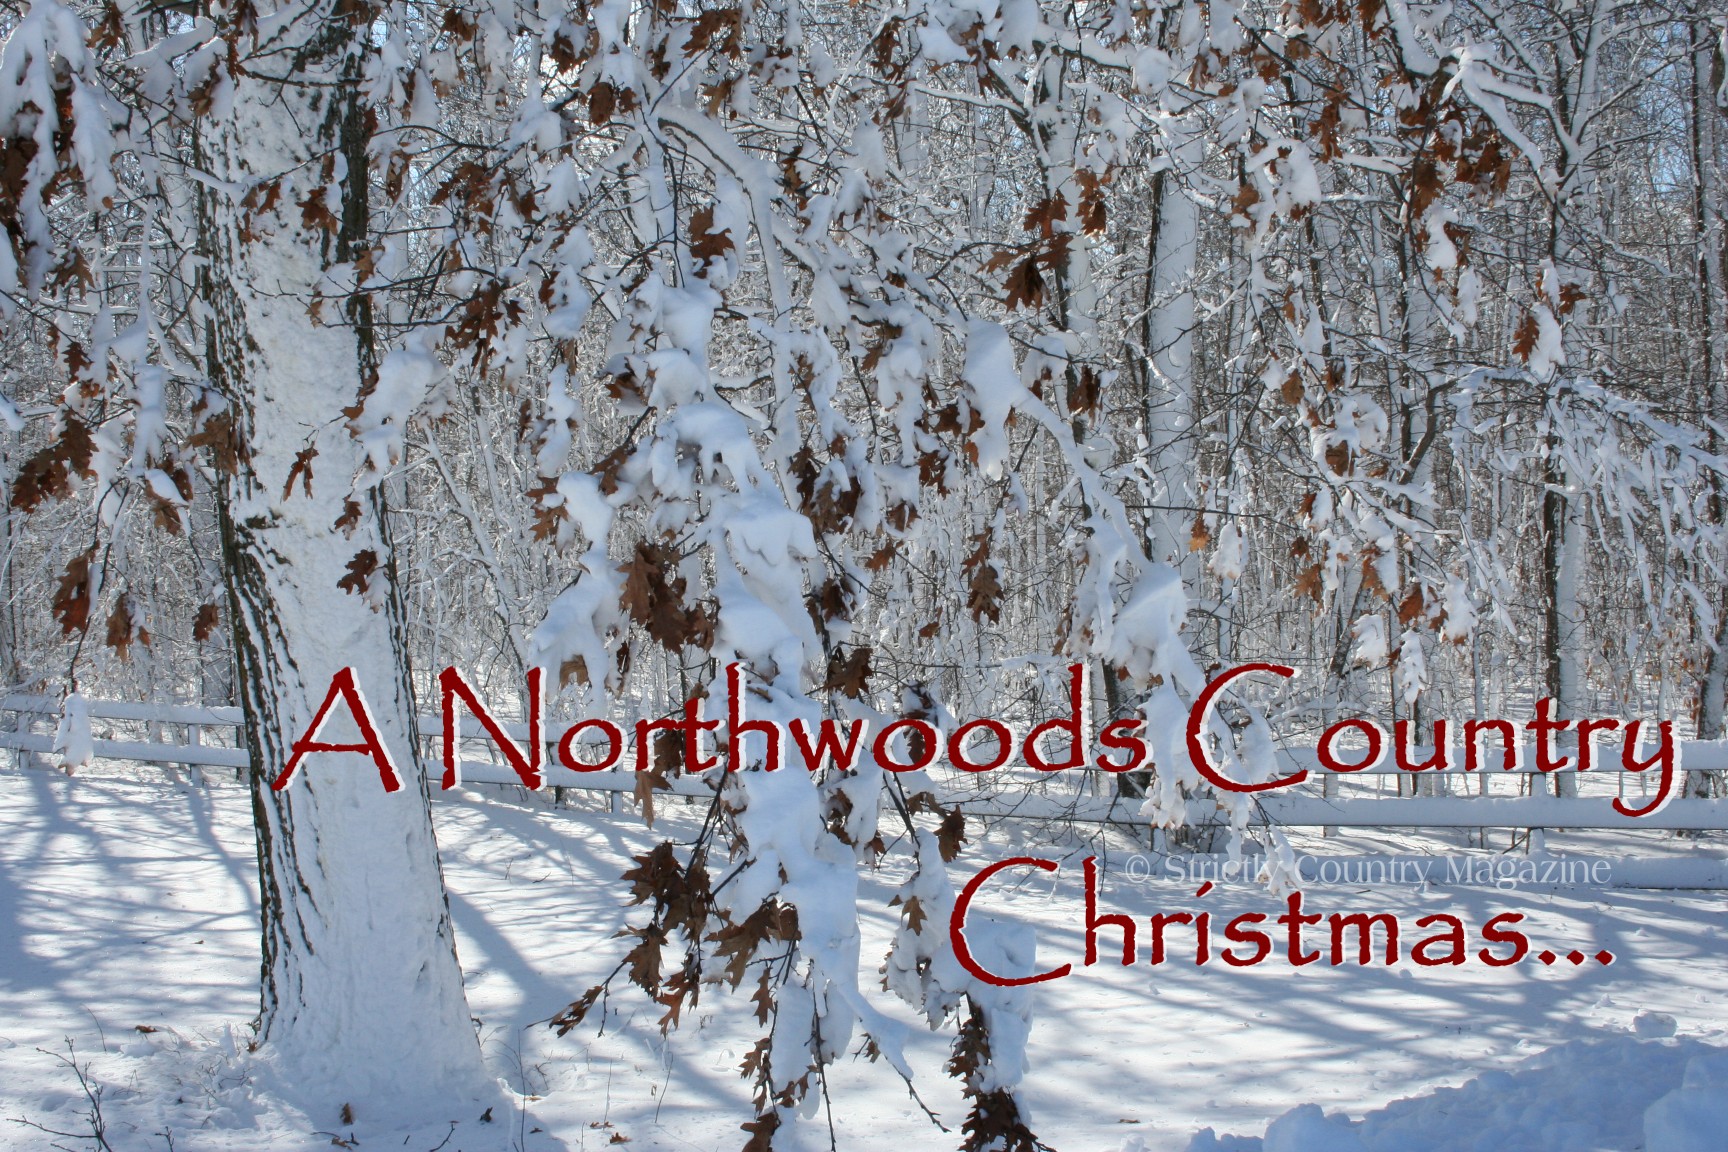 Strictly Country copyright A Northwoods Country Christmas Christmas logo